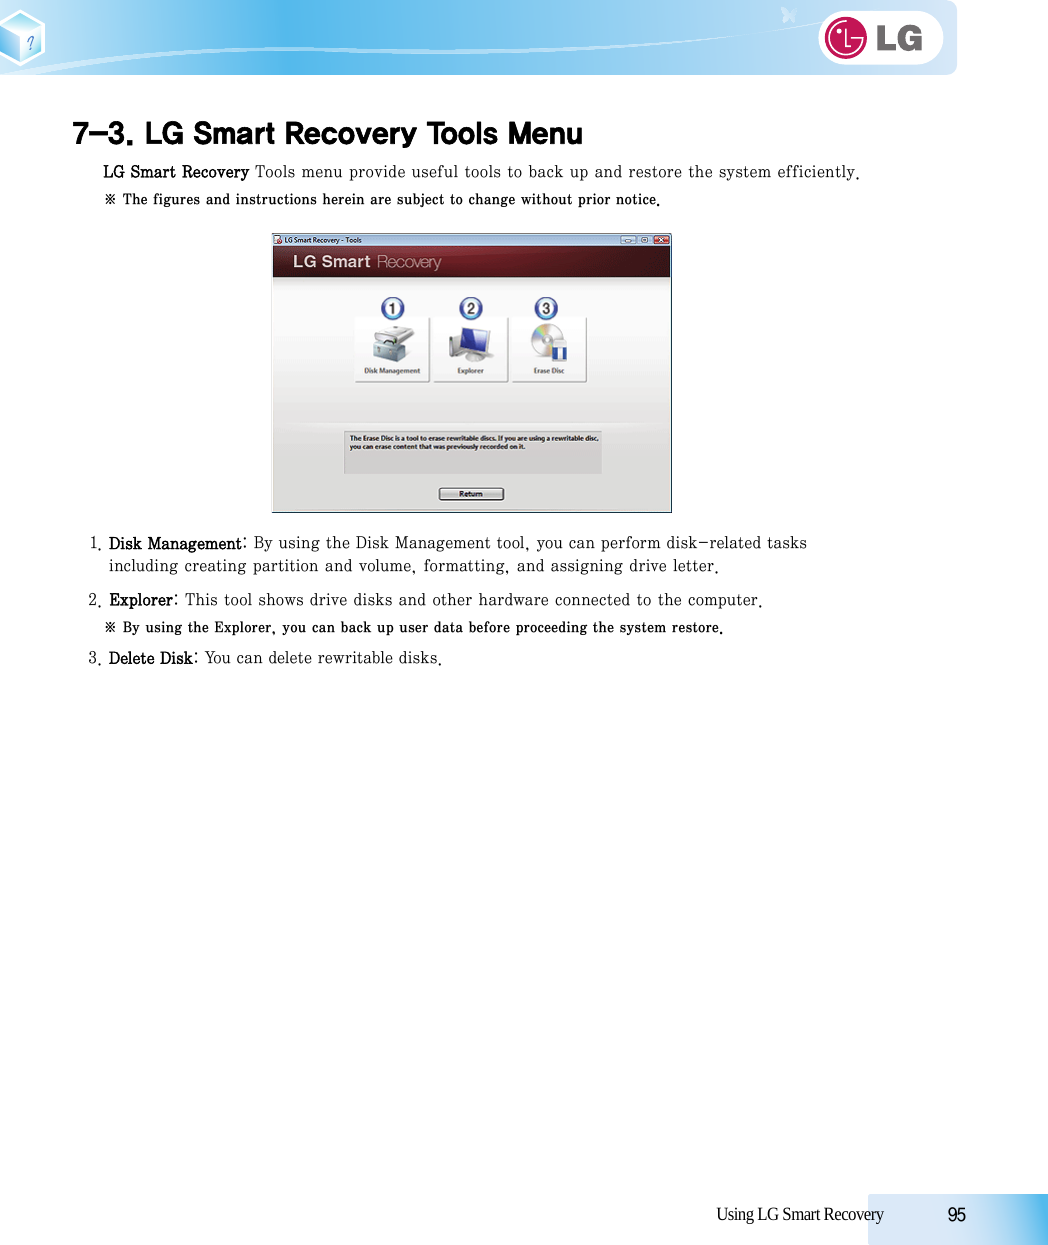 Using LG Smart Recovery            957-3. LG Smart Recovery Tools MenuLG Smart Recovery Tools menu provide useful tools to back up and restore the system efficiently.※ The figures and instructions herein are subject to change without prior notice.1. Disk Management: By using the Disk Management tool, you can perform disk-related tasks including creating partition and volume, formatting, and assigning drive letter.2. Explorer: This tool shows drive disks and other hardware connected to the computer.※ By using the Explorer, you can back up user data before proceeding the system restore.3. Delete Disk: You can delete rewritable disks. 